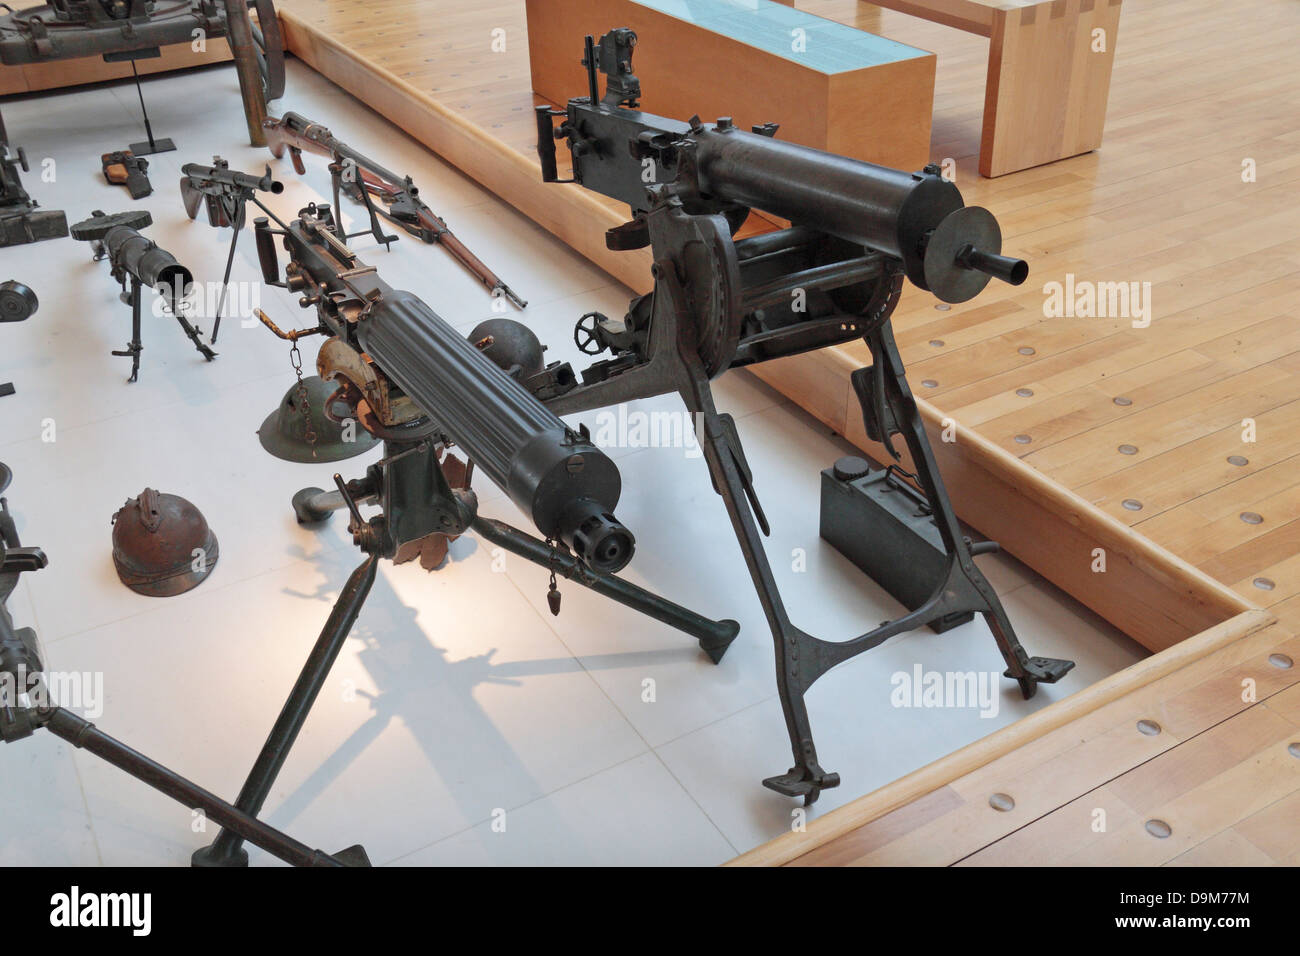 British Vickers & German Maxime machine guns on display at the Historical de la Grande Guerre Museum, Peronne, Somme, France. Stock Photo